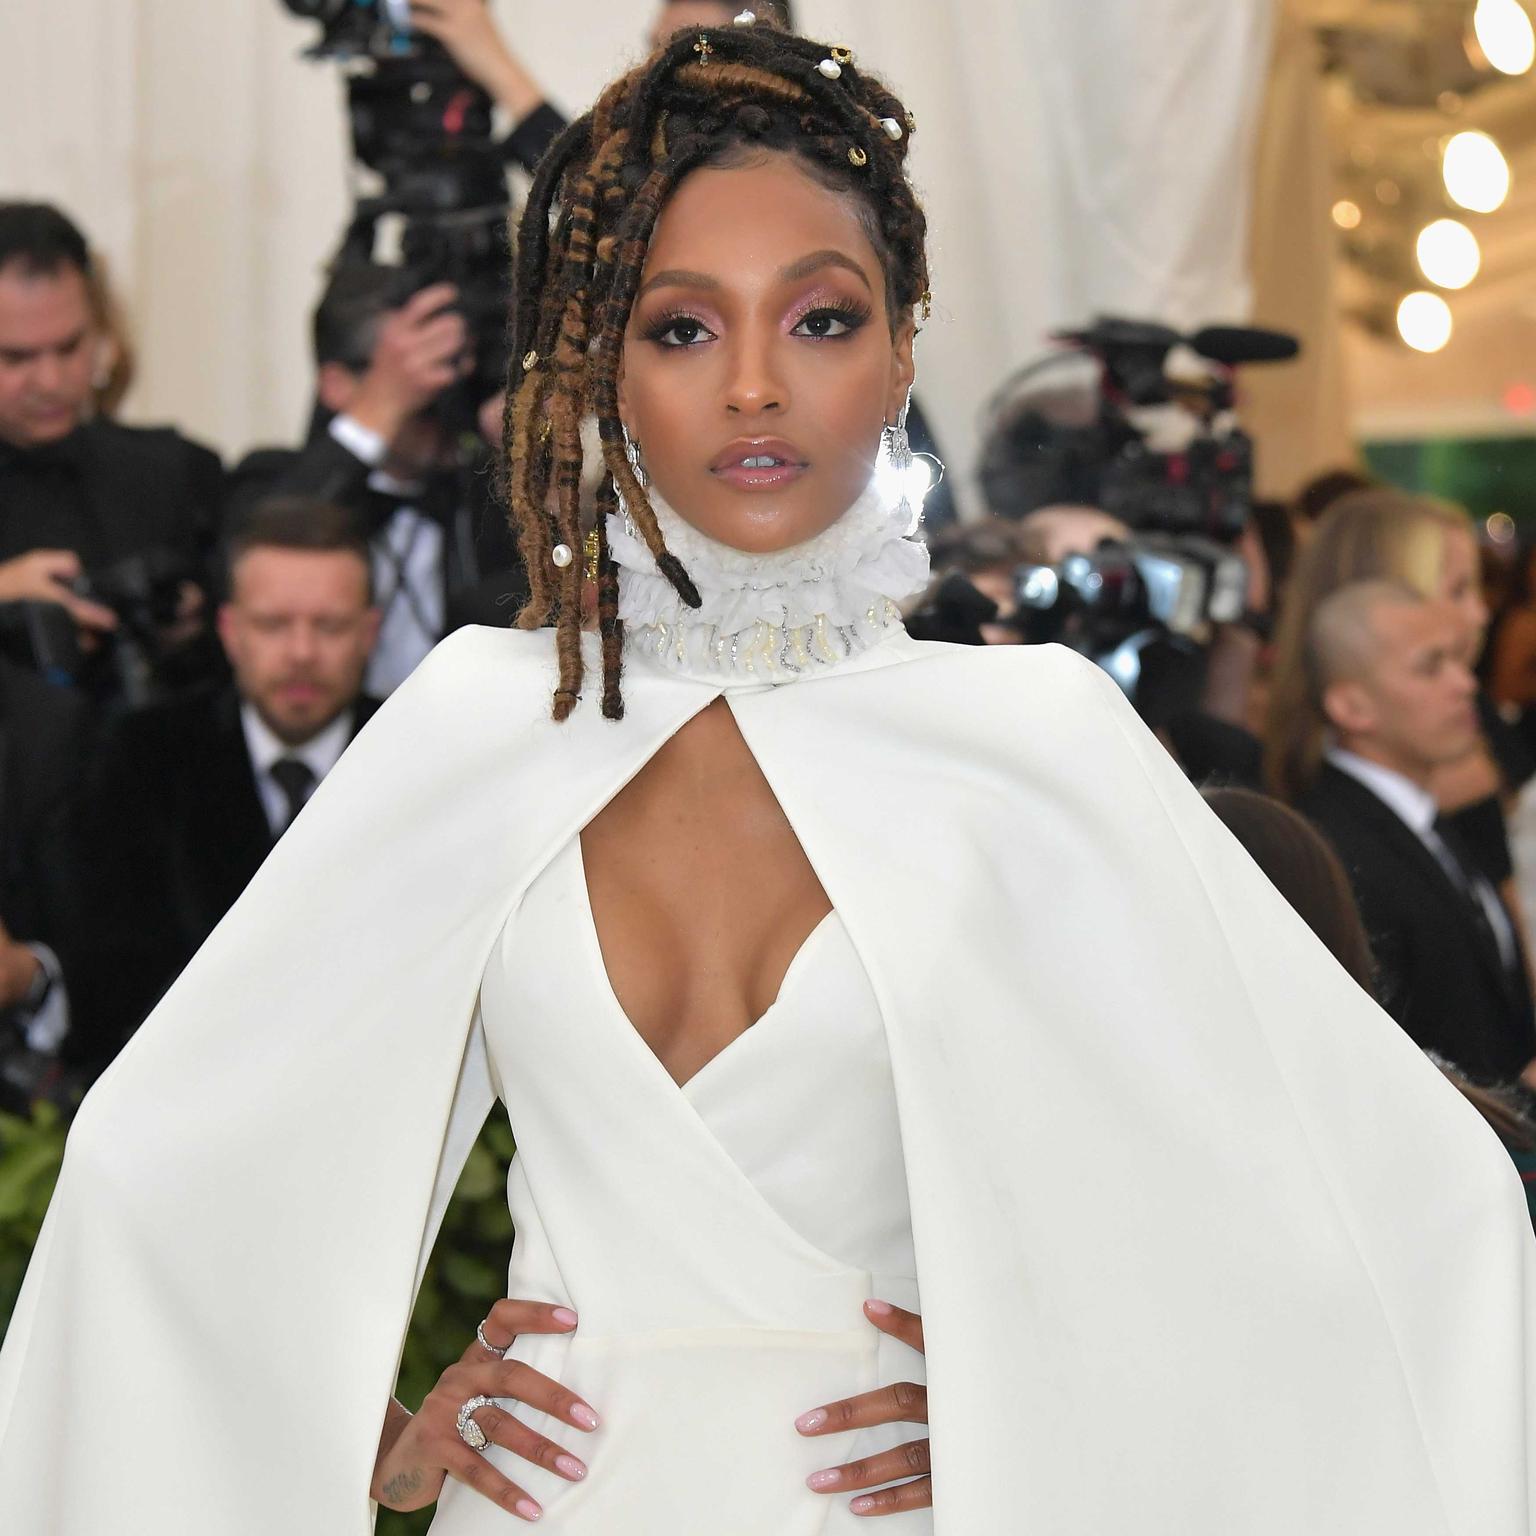 Jourdan Dunn in Bulgari jewels at Met Gala 2018 including Serpenti drop earrings with two matching rings and a Diva’s Dream ring. Credit: Getty Images